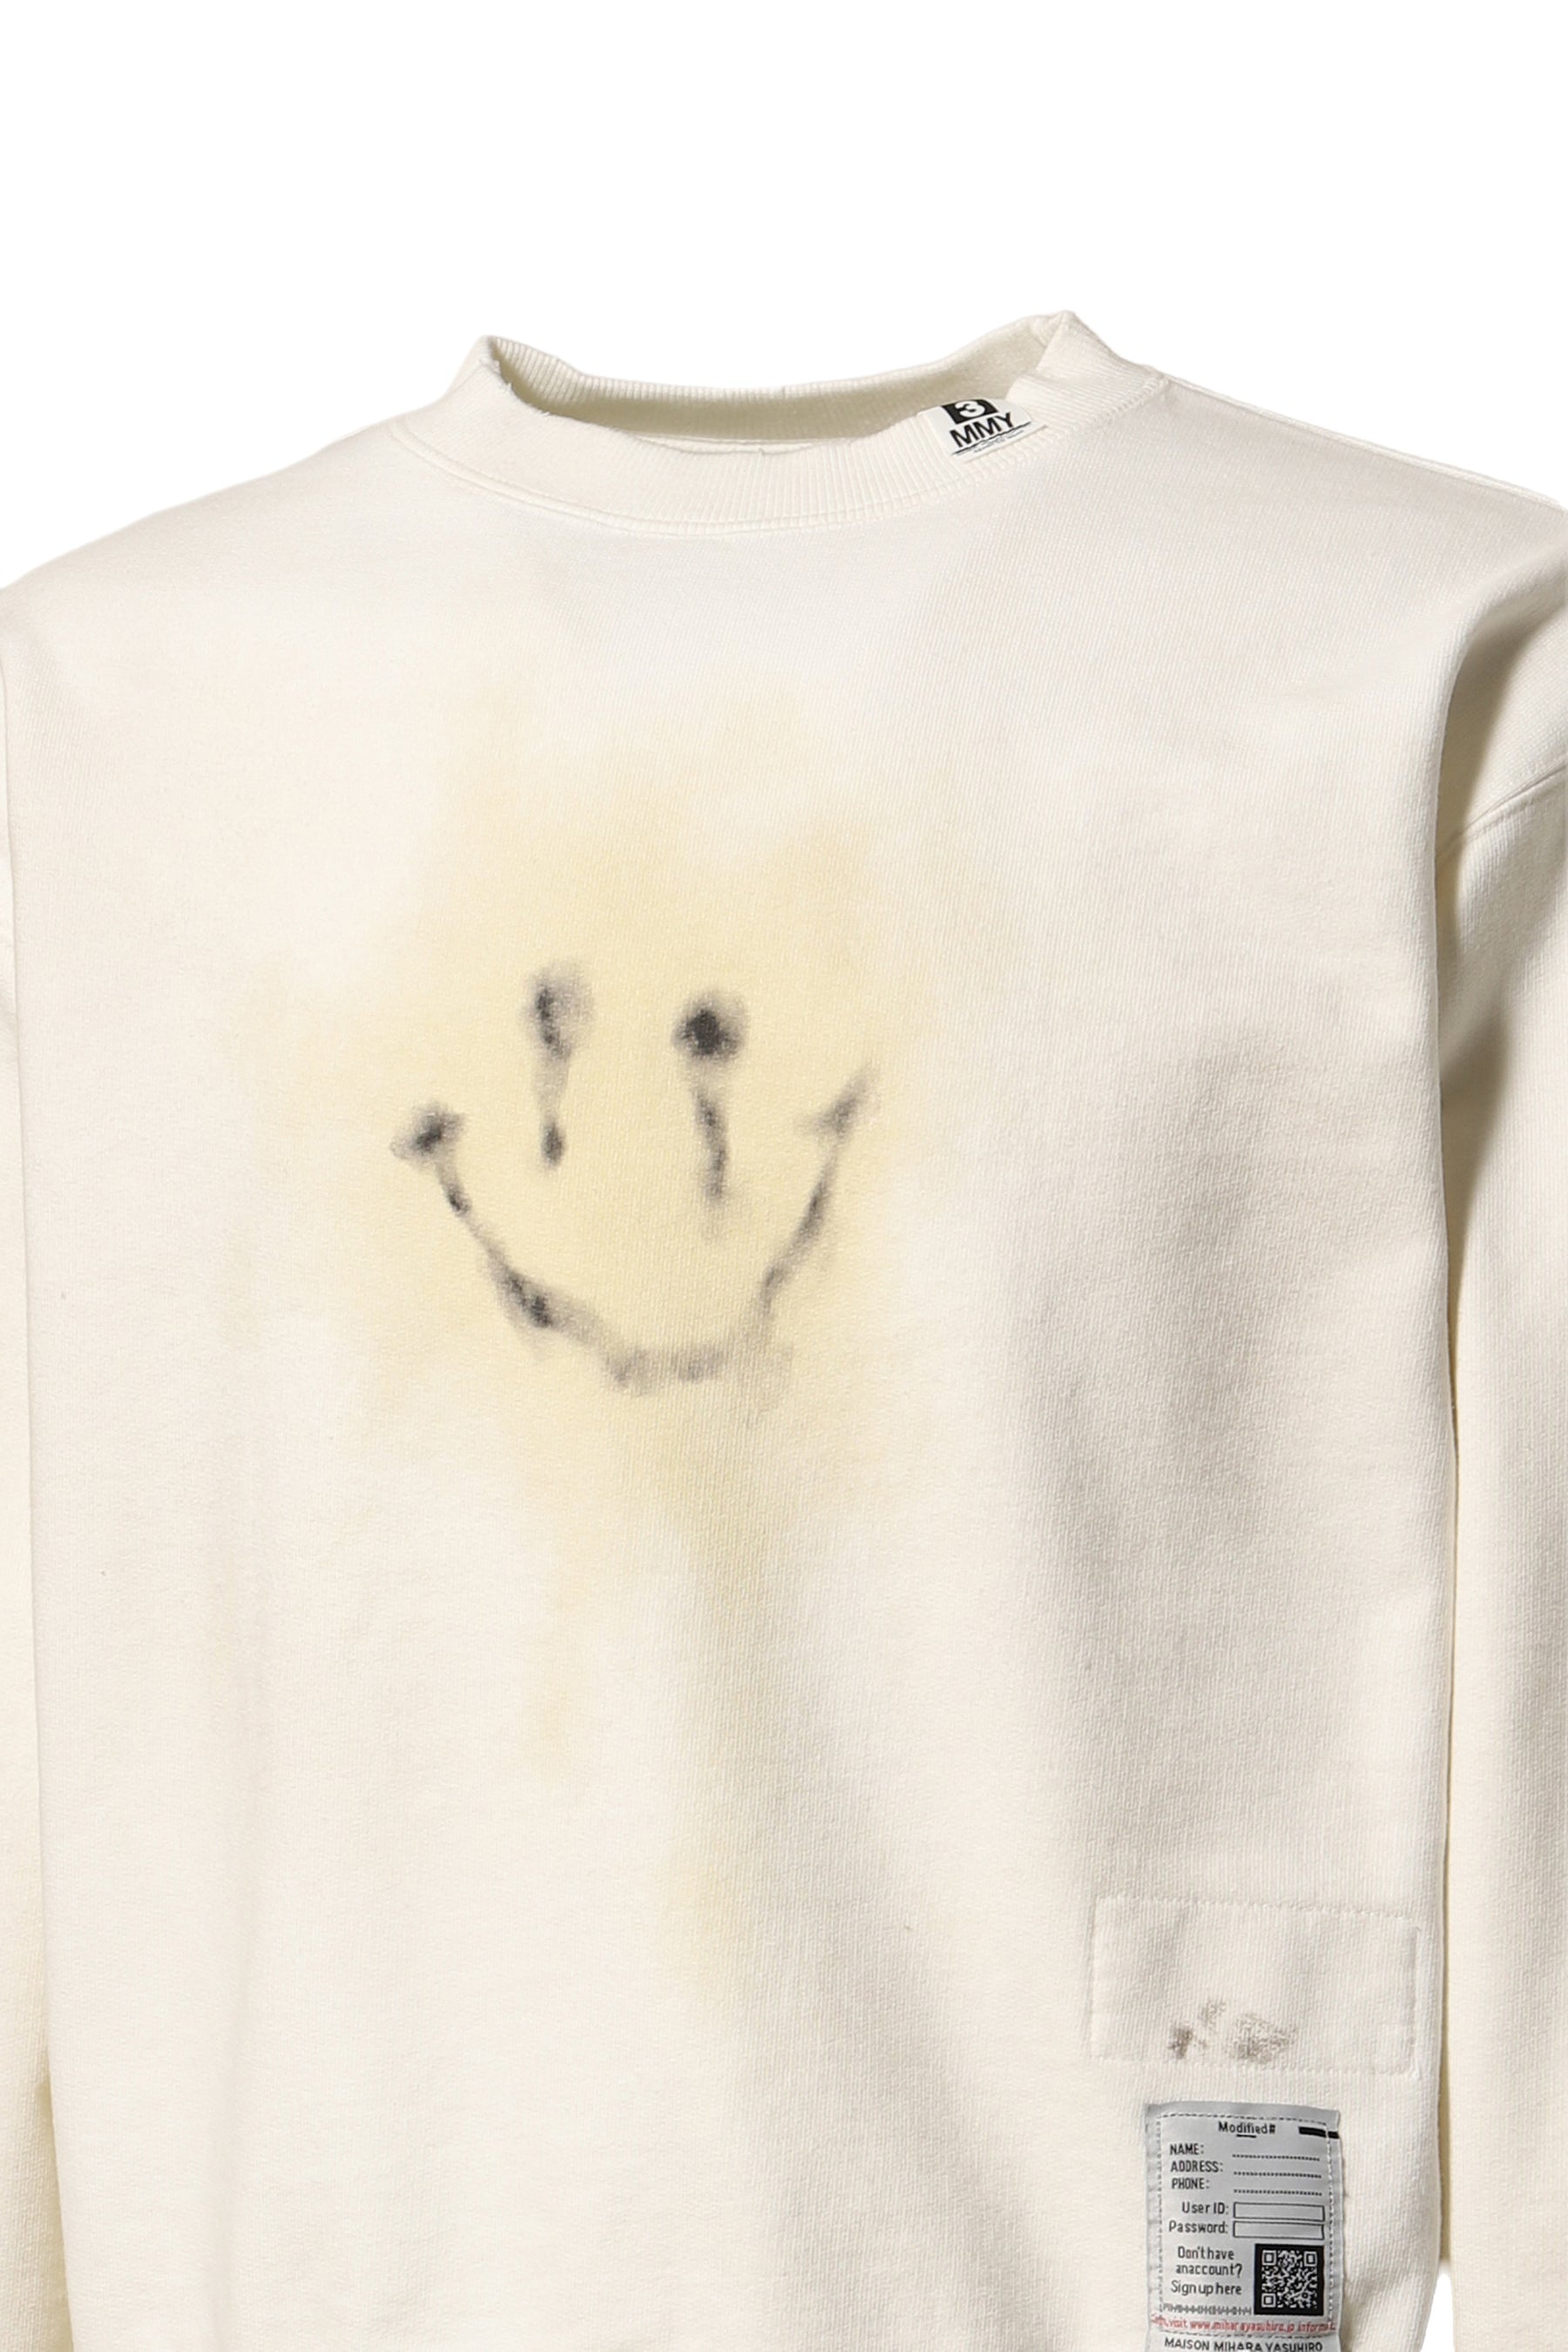 DISTRESSED SMILY FACE PT PULLOVER / WHT - 4